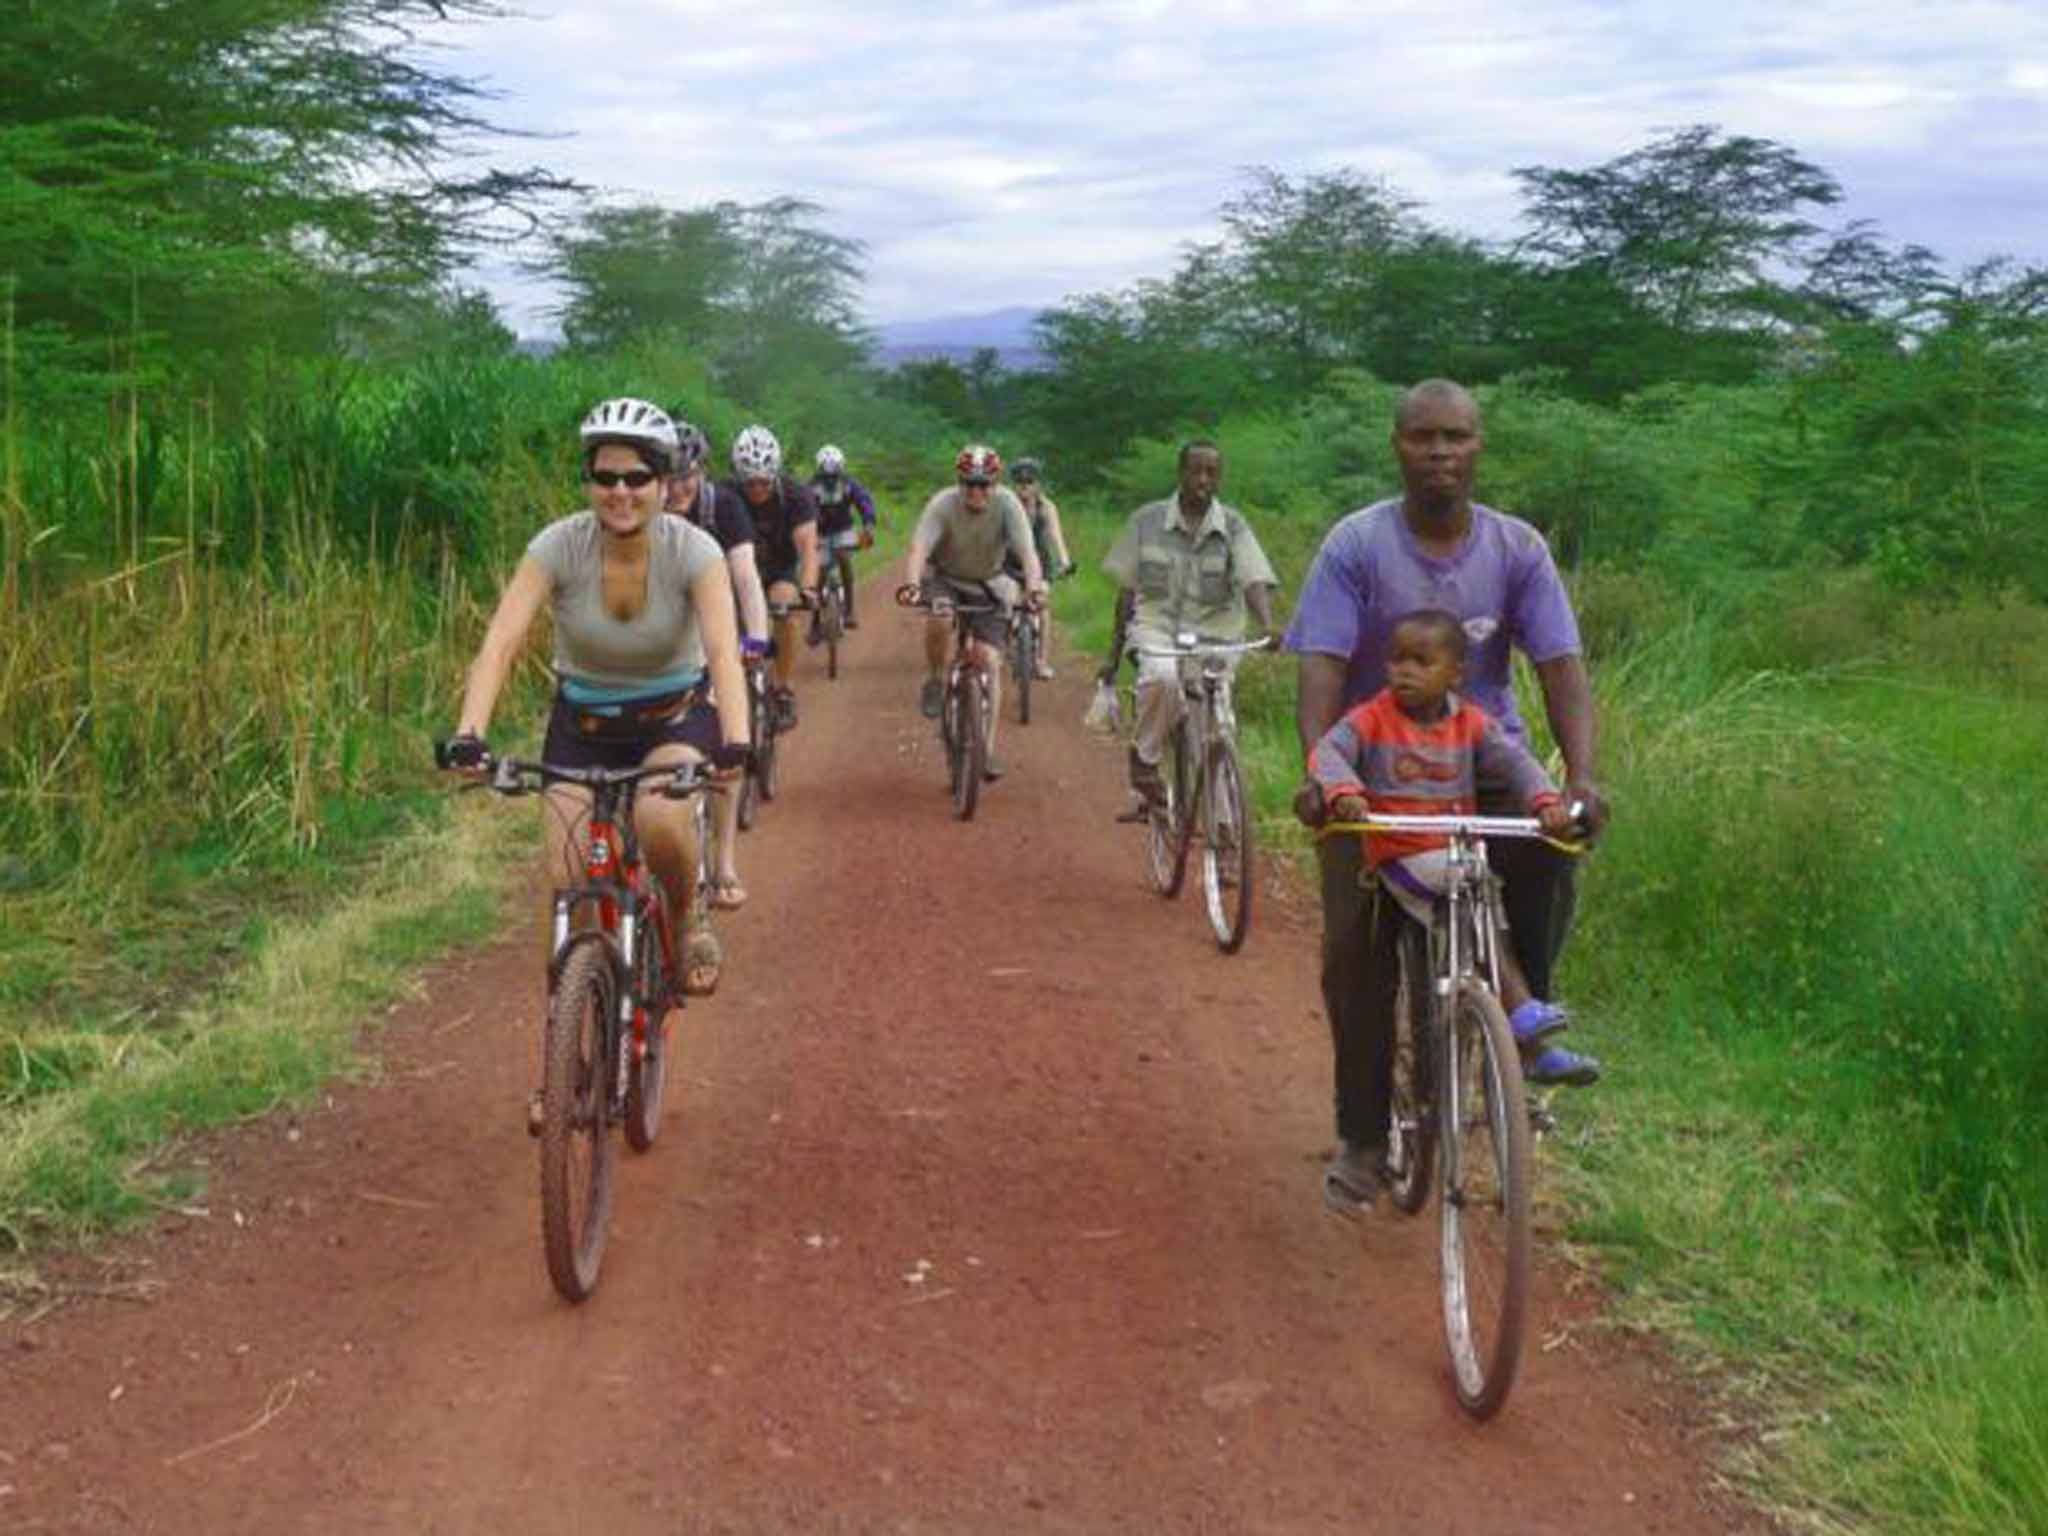 Exodus is offering a new Cycle Kilimanjaro trip in Tanzania